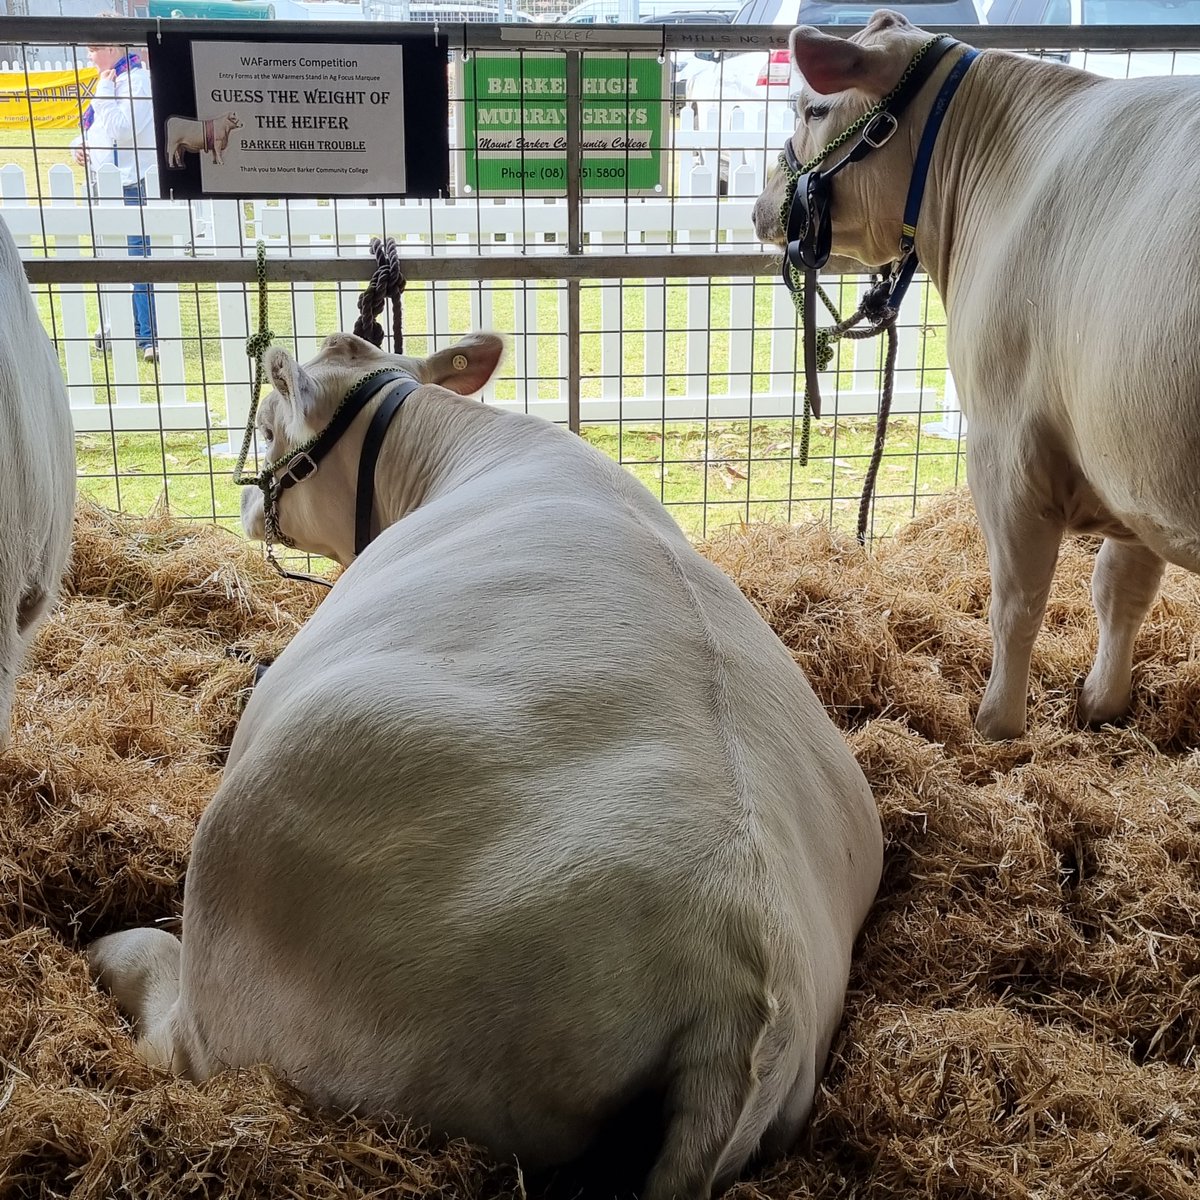 Check out the competitions @WAFarmers at the Albany Show. The weight of that heifer might be a challenge.